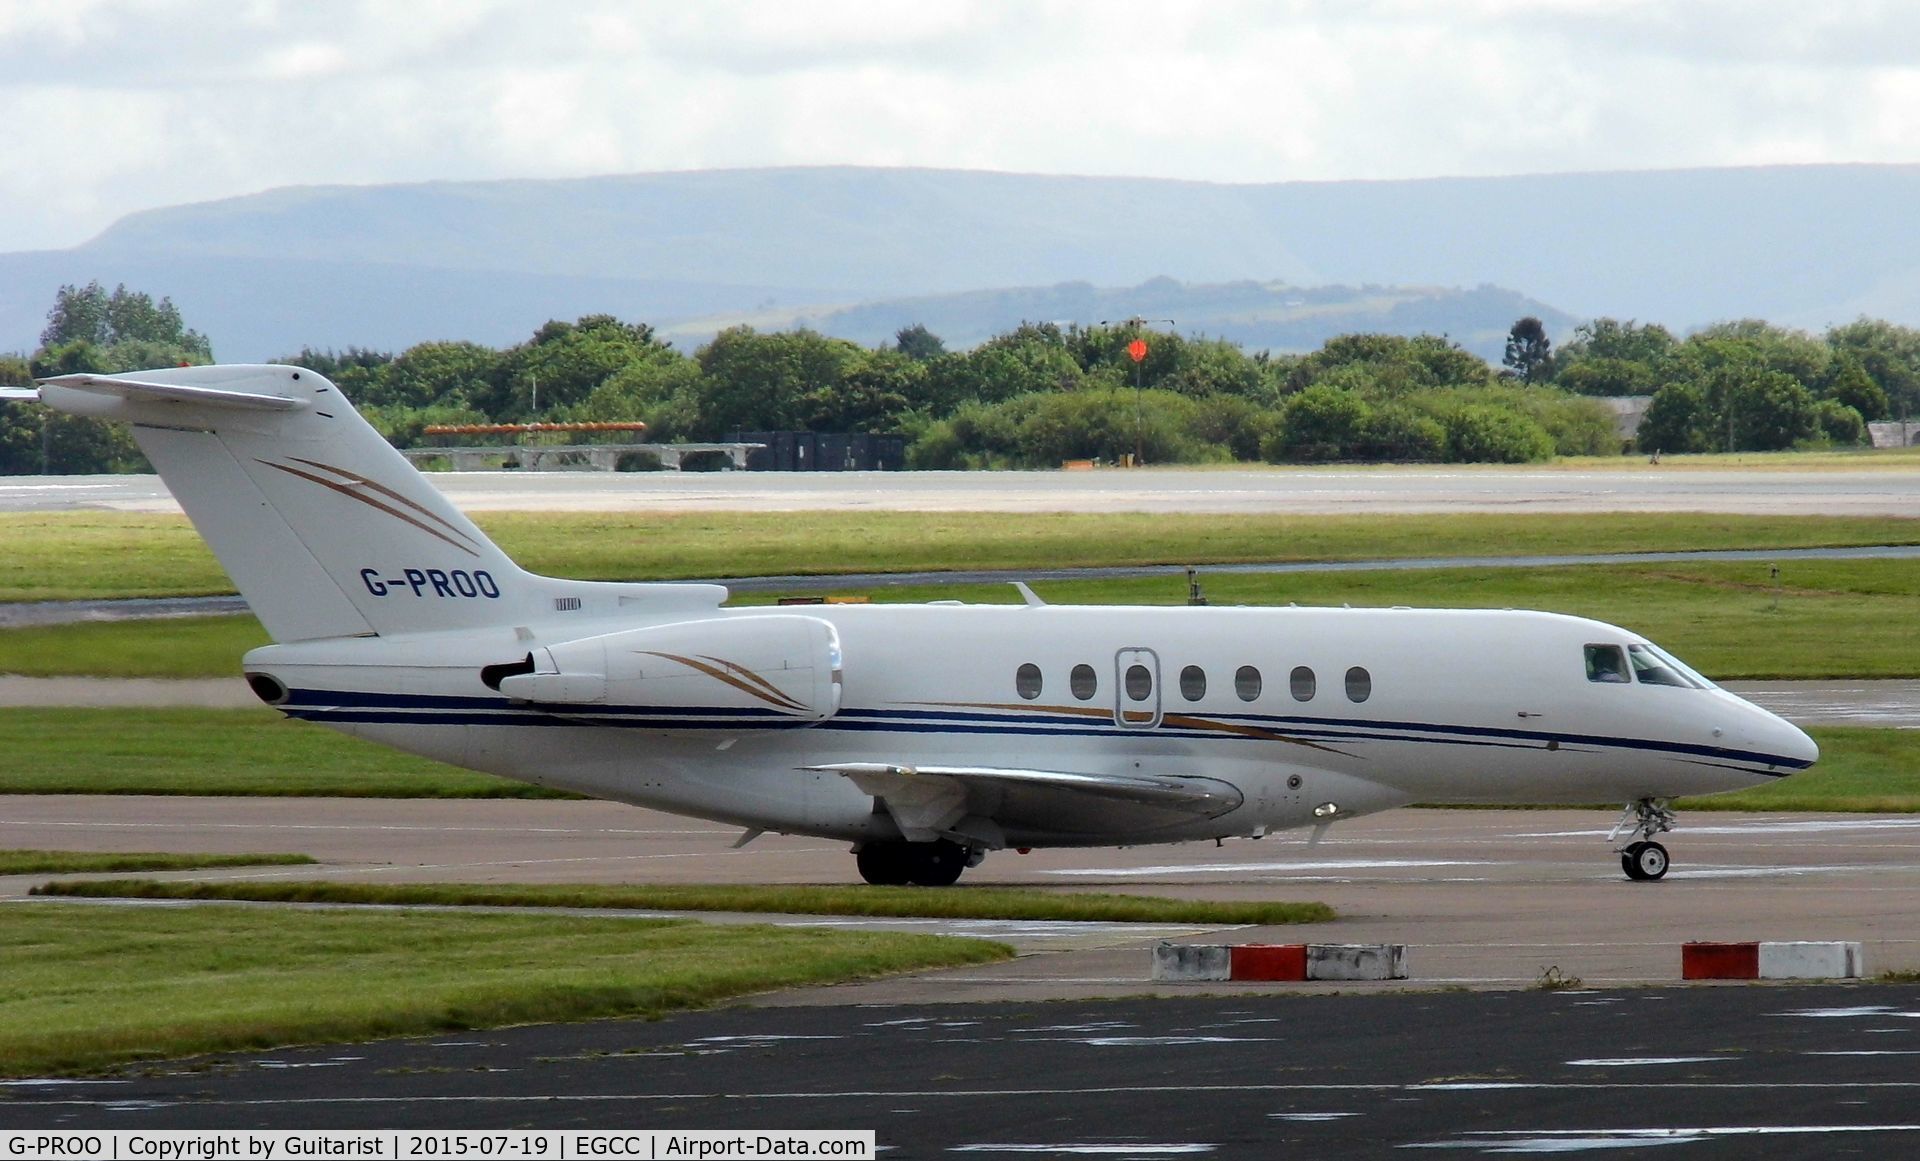 G-PROO, 2009 Hawker Beechcraft 4000 C/N RC-34, At Manchester